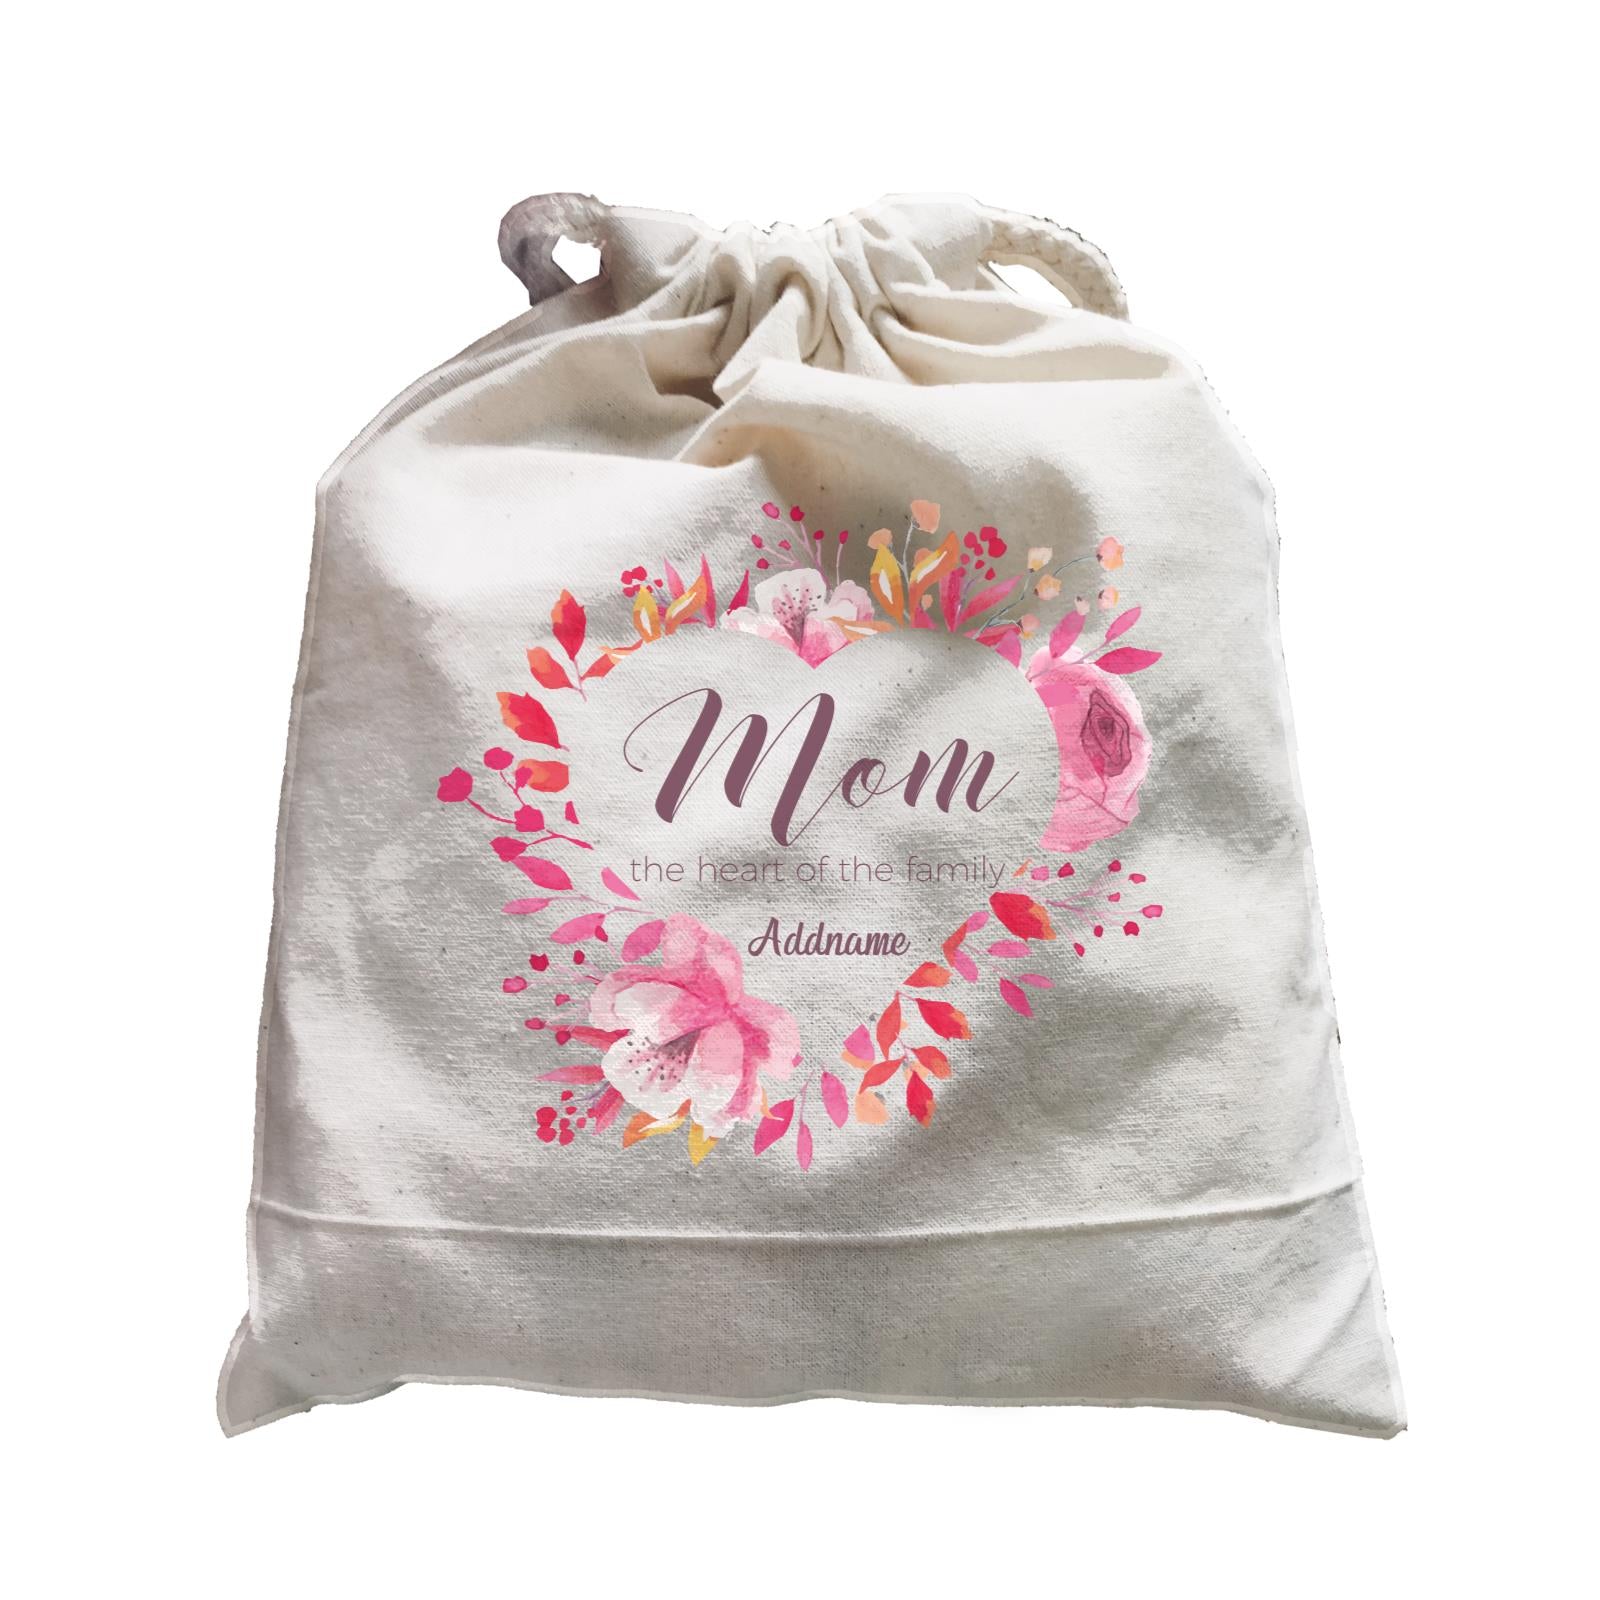 Sweet Mom Heart Mom The Heart of The Family Addname Satchel